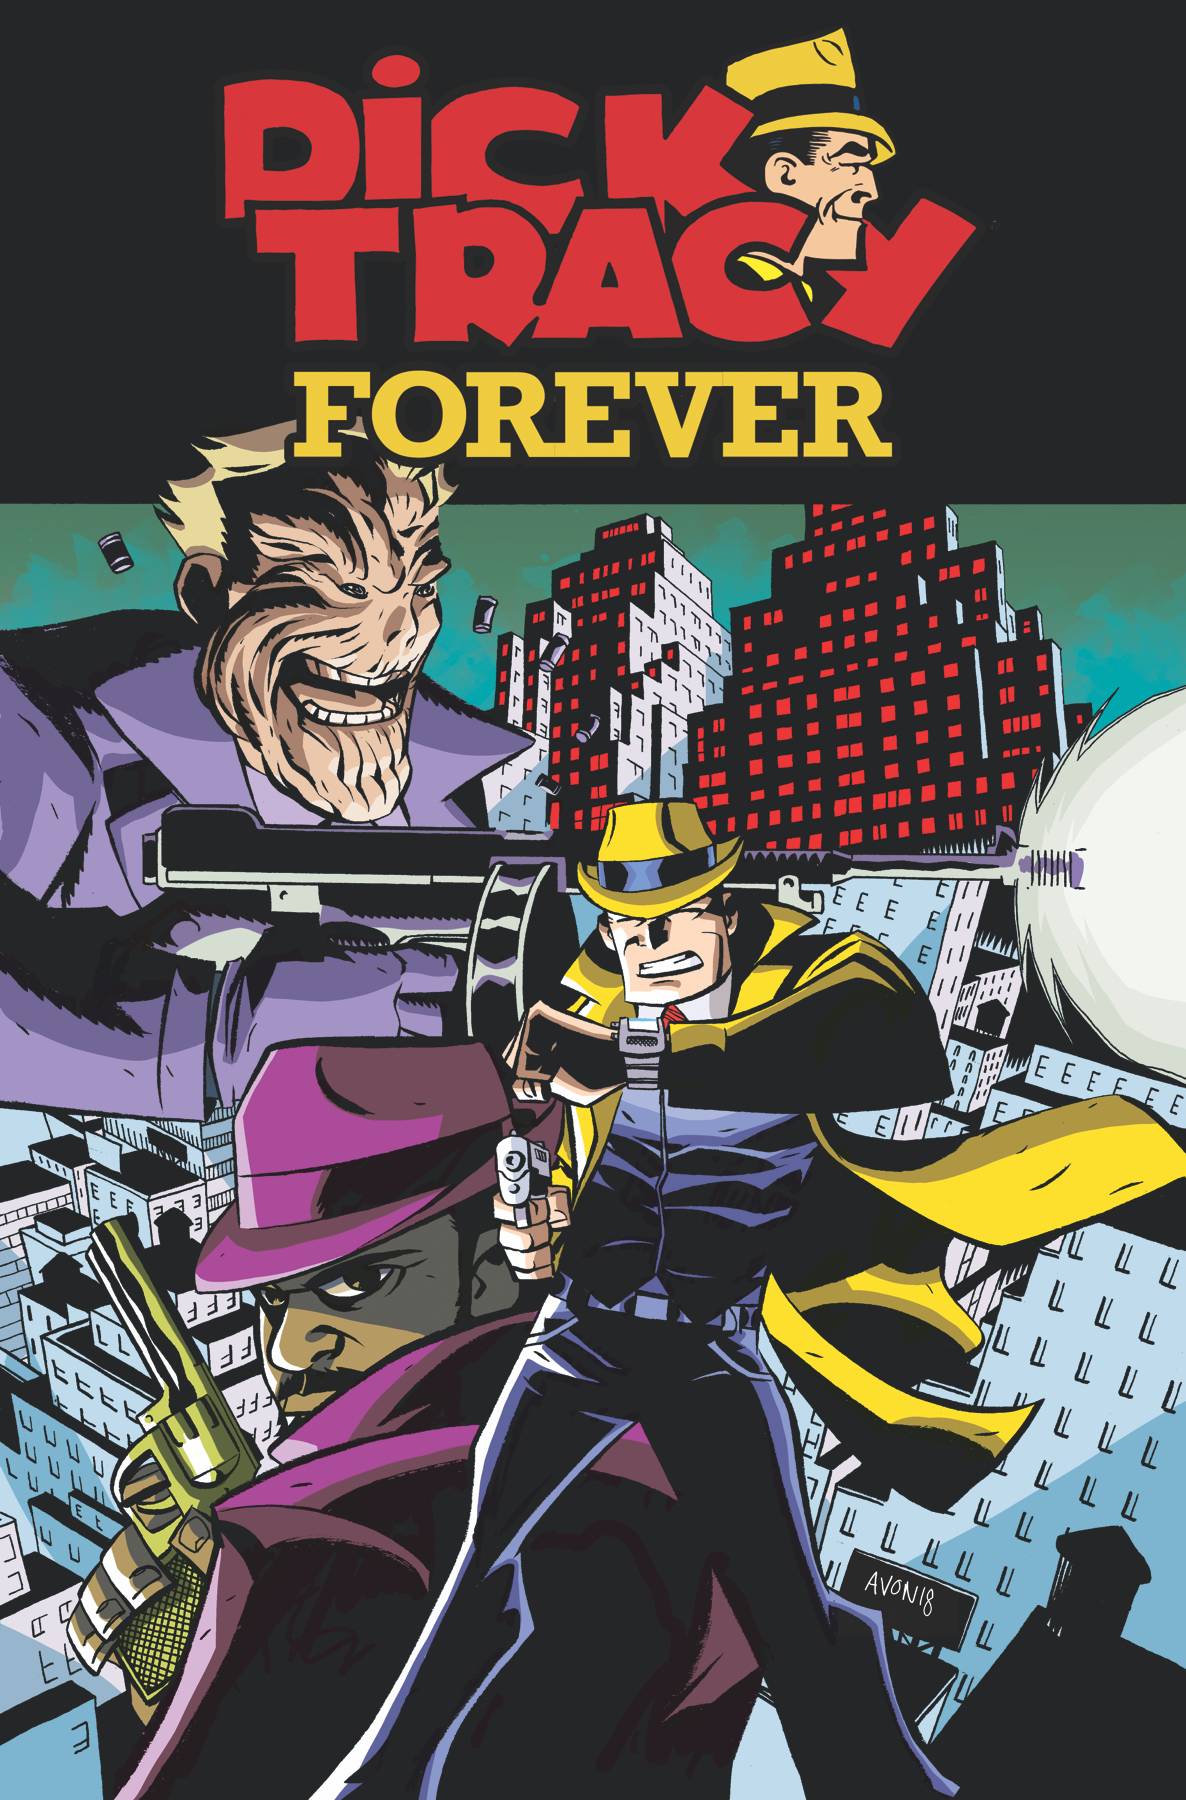 Dick Tracy Forever #2 Cover A Oeming